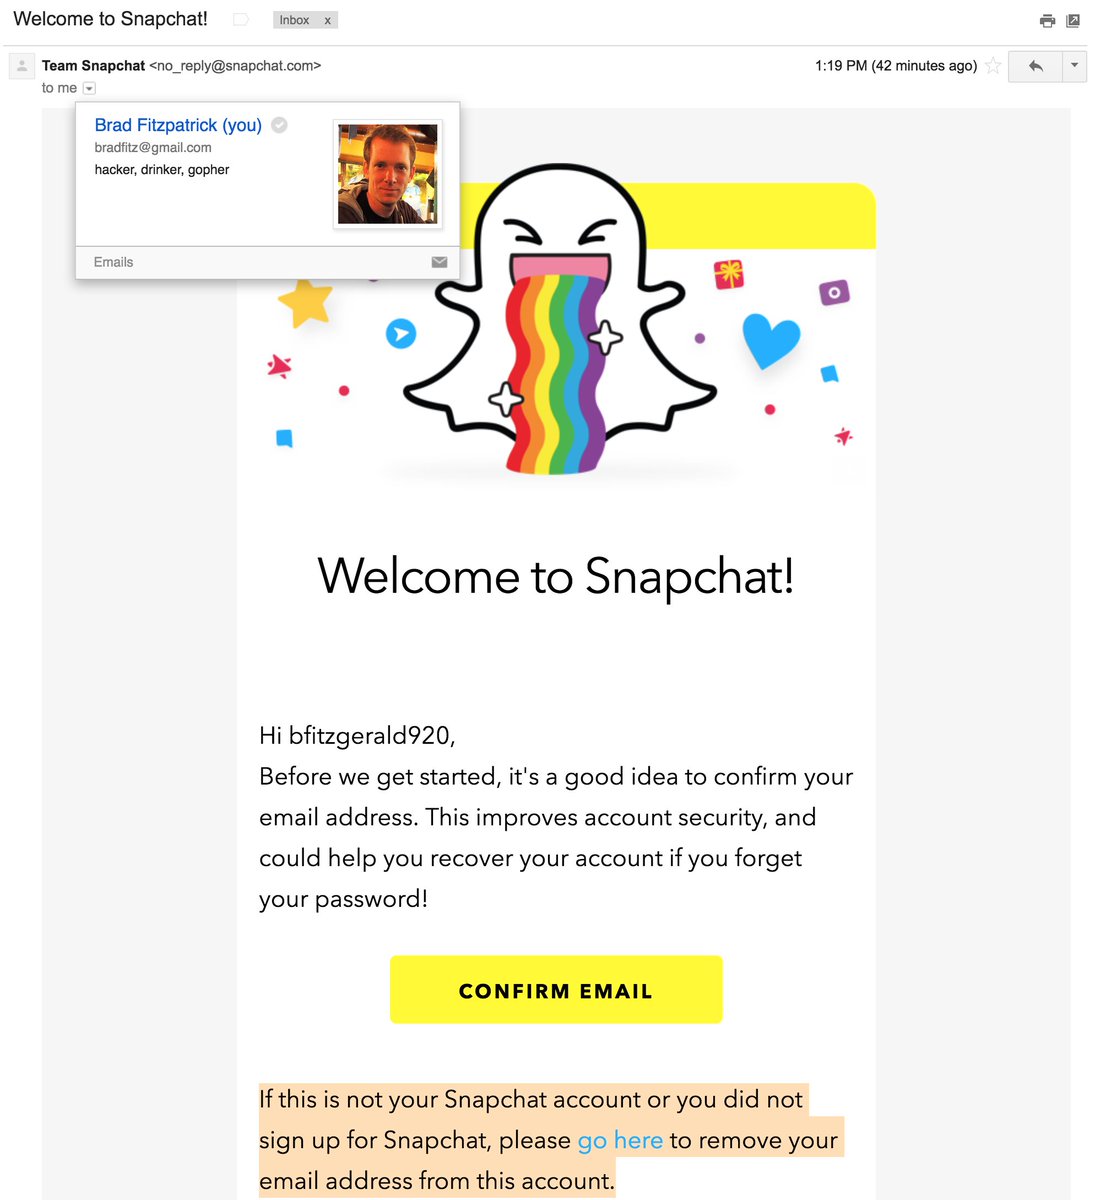 Can You Have Two Snapchat Accounts On The Same Email Bradfitz On Twitter If This Is Not Your Snapchat Account Or You Did Not Sign Up For Snapchat Props To Snapchat On Having A Negative Confirmation Of Email Address Link In